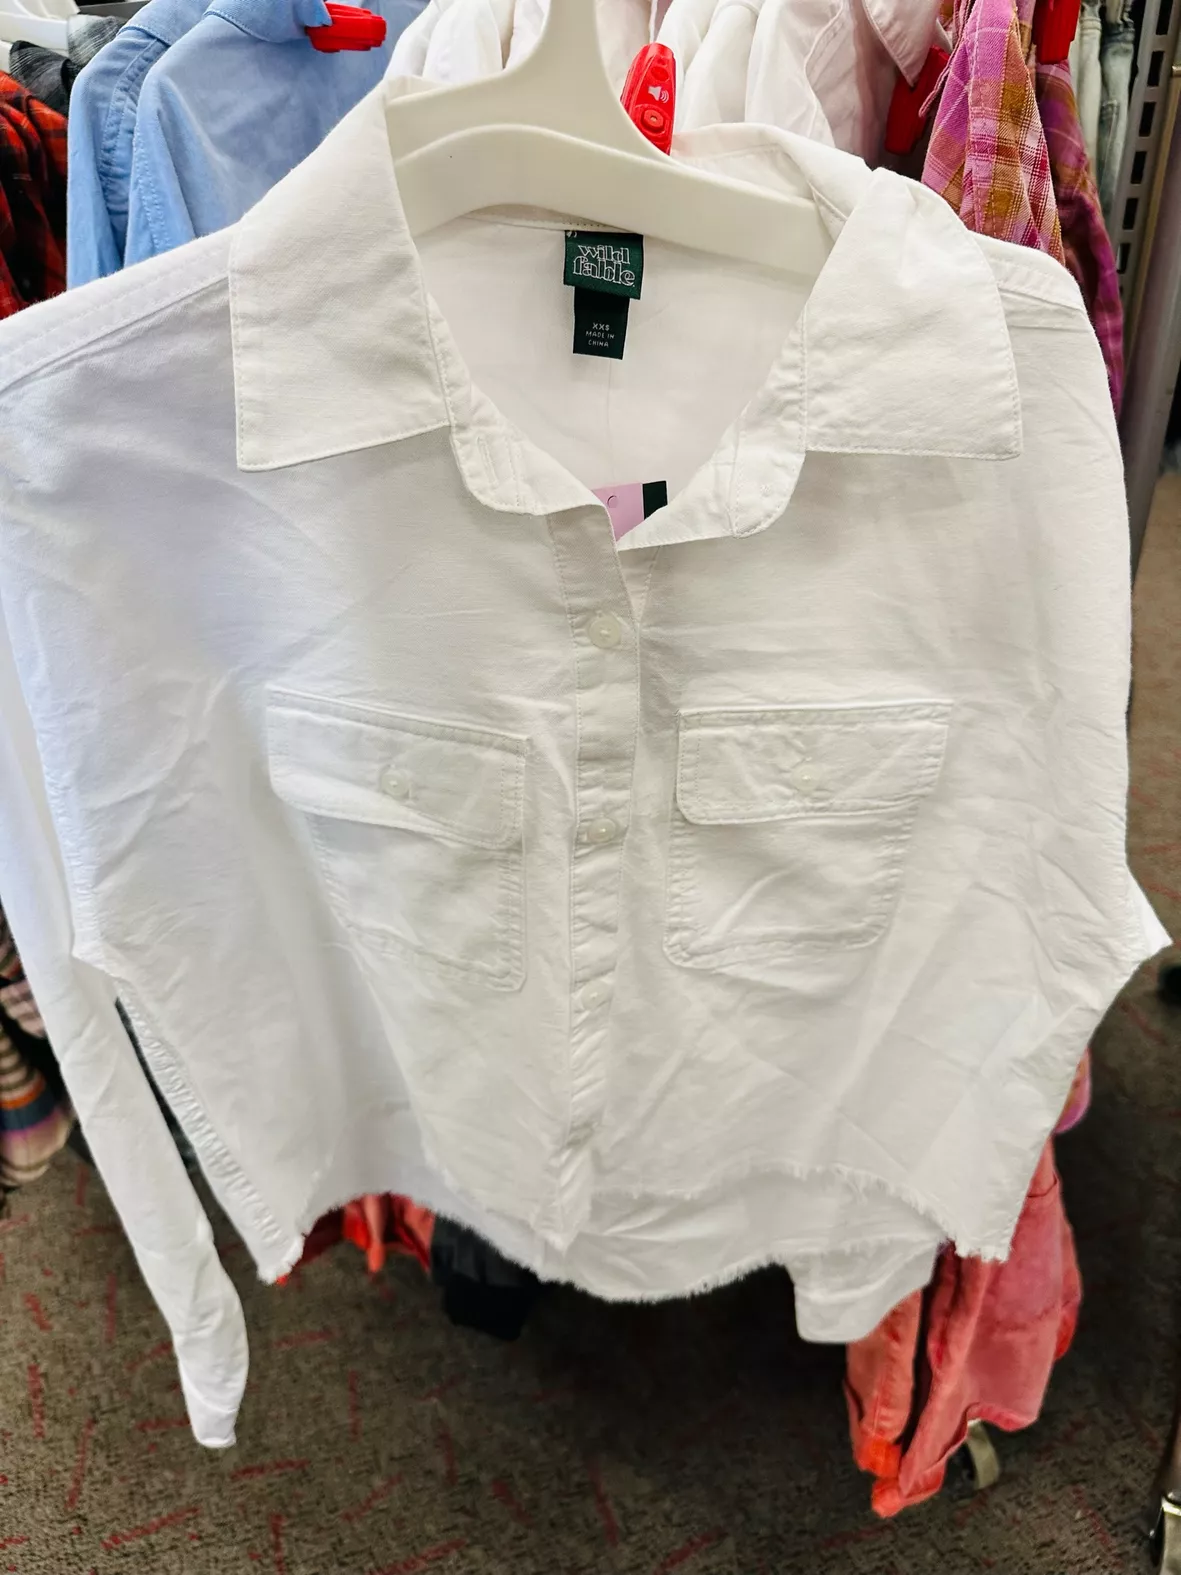 An On-Trend Top: Wild Fable Short Sleeve Woven Button-Down Shirt